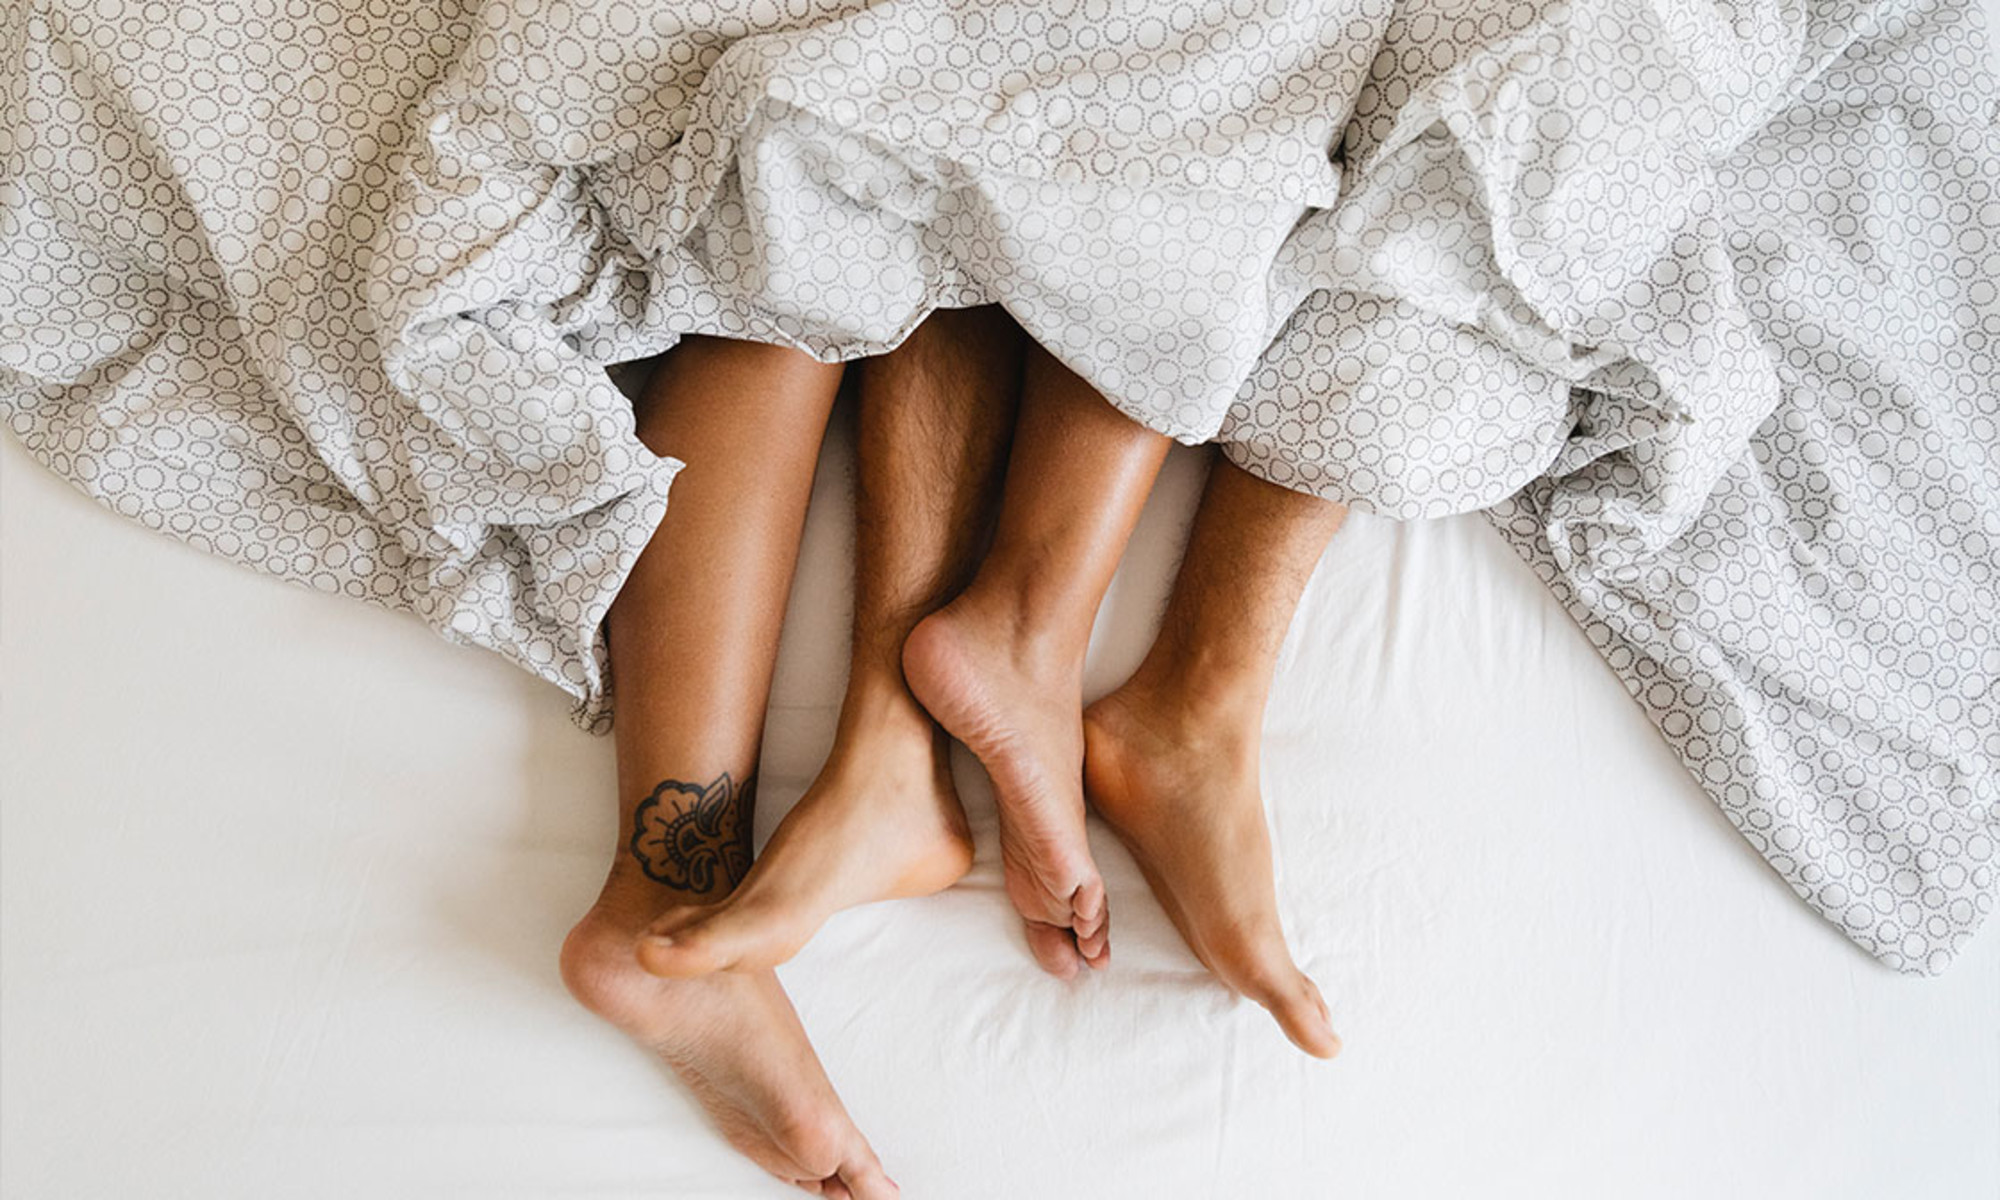 5 Ways To Spice Up Your Missionary Position, From Experts mindbodygreen